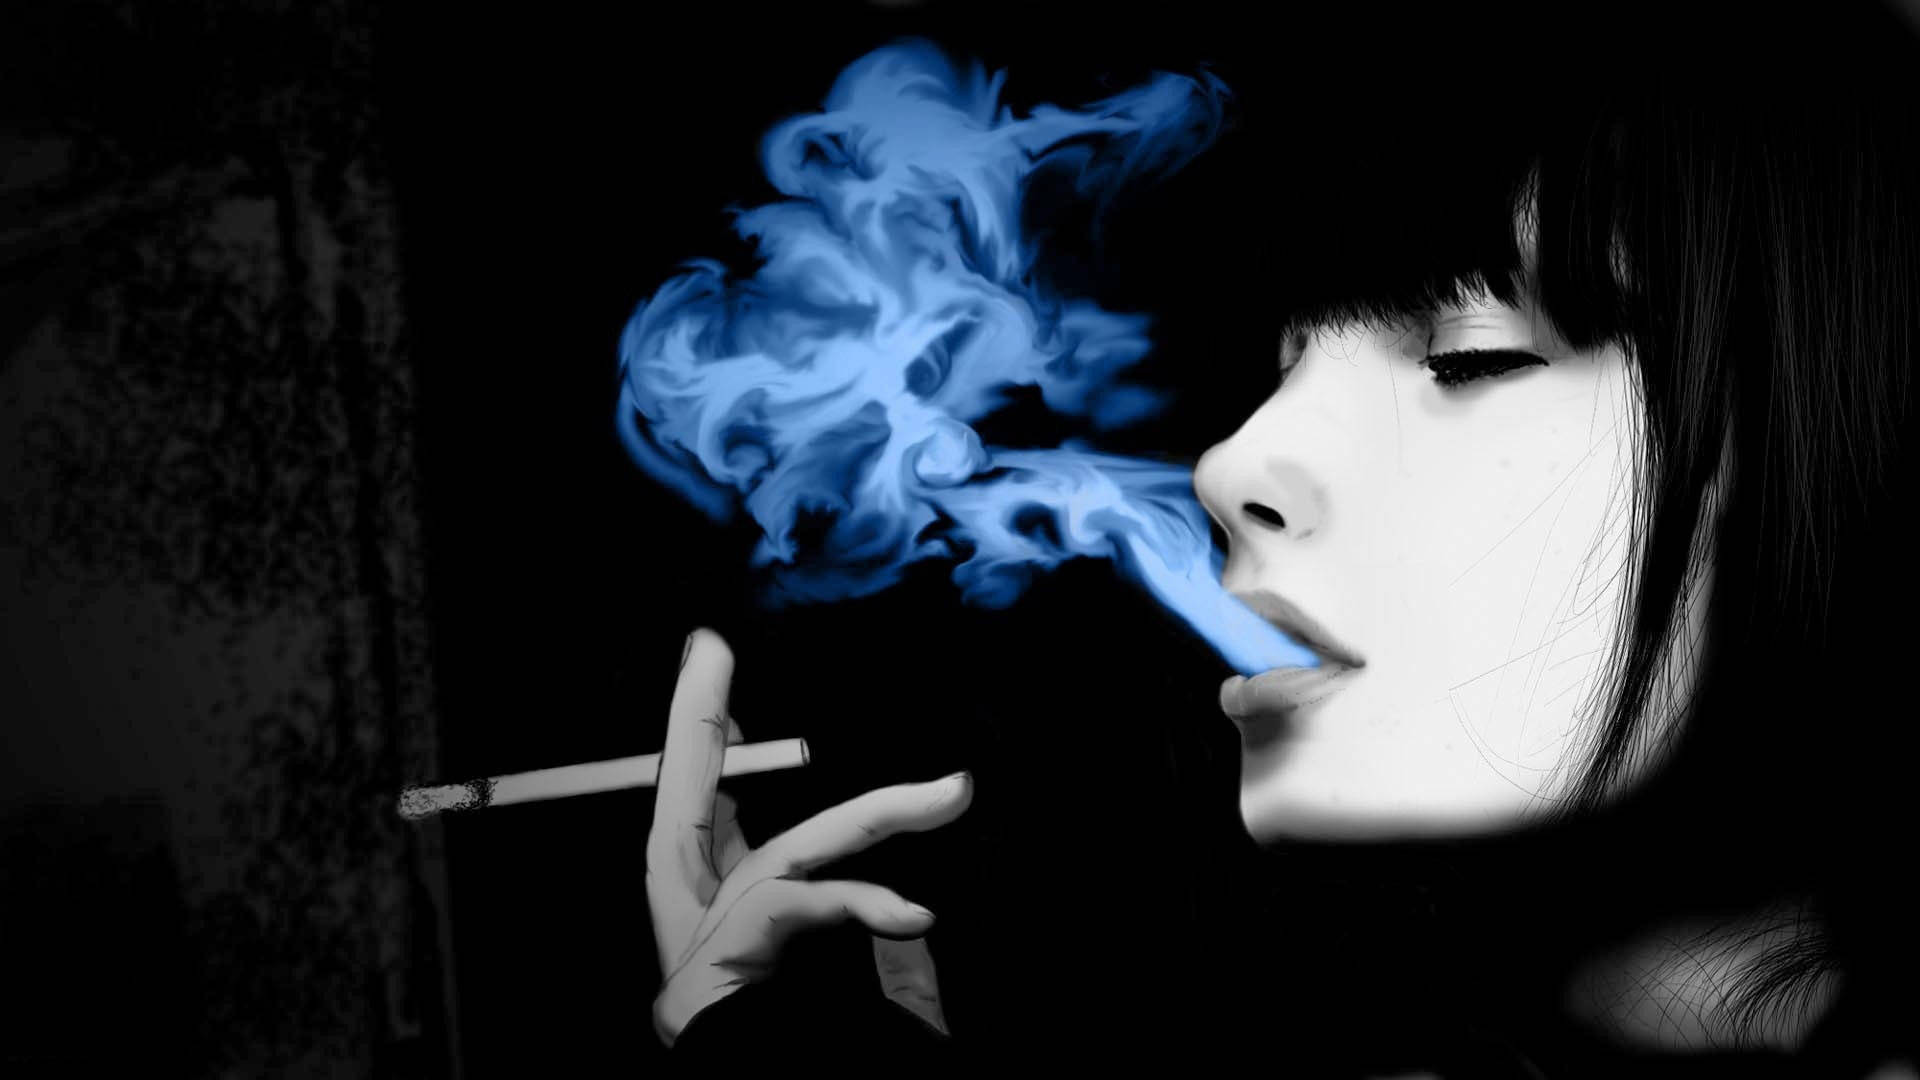 A Person's Hand Holding A Lit Cigarette With Smoke Wafting Upwards. Background